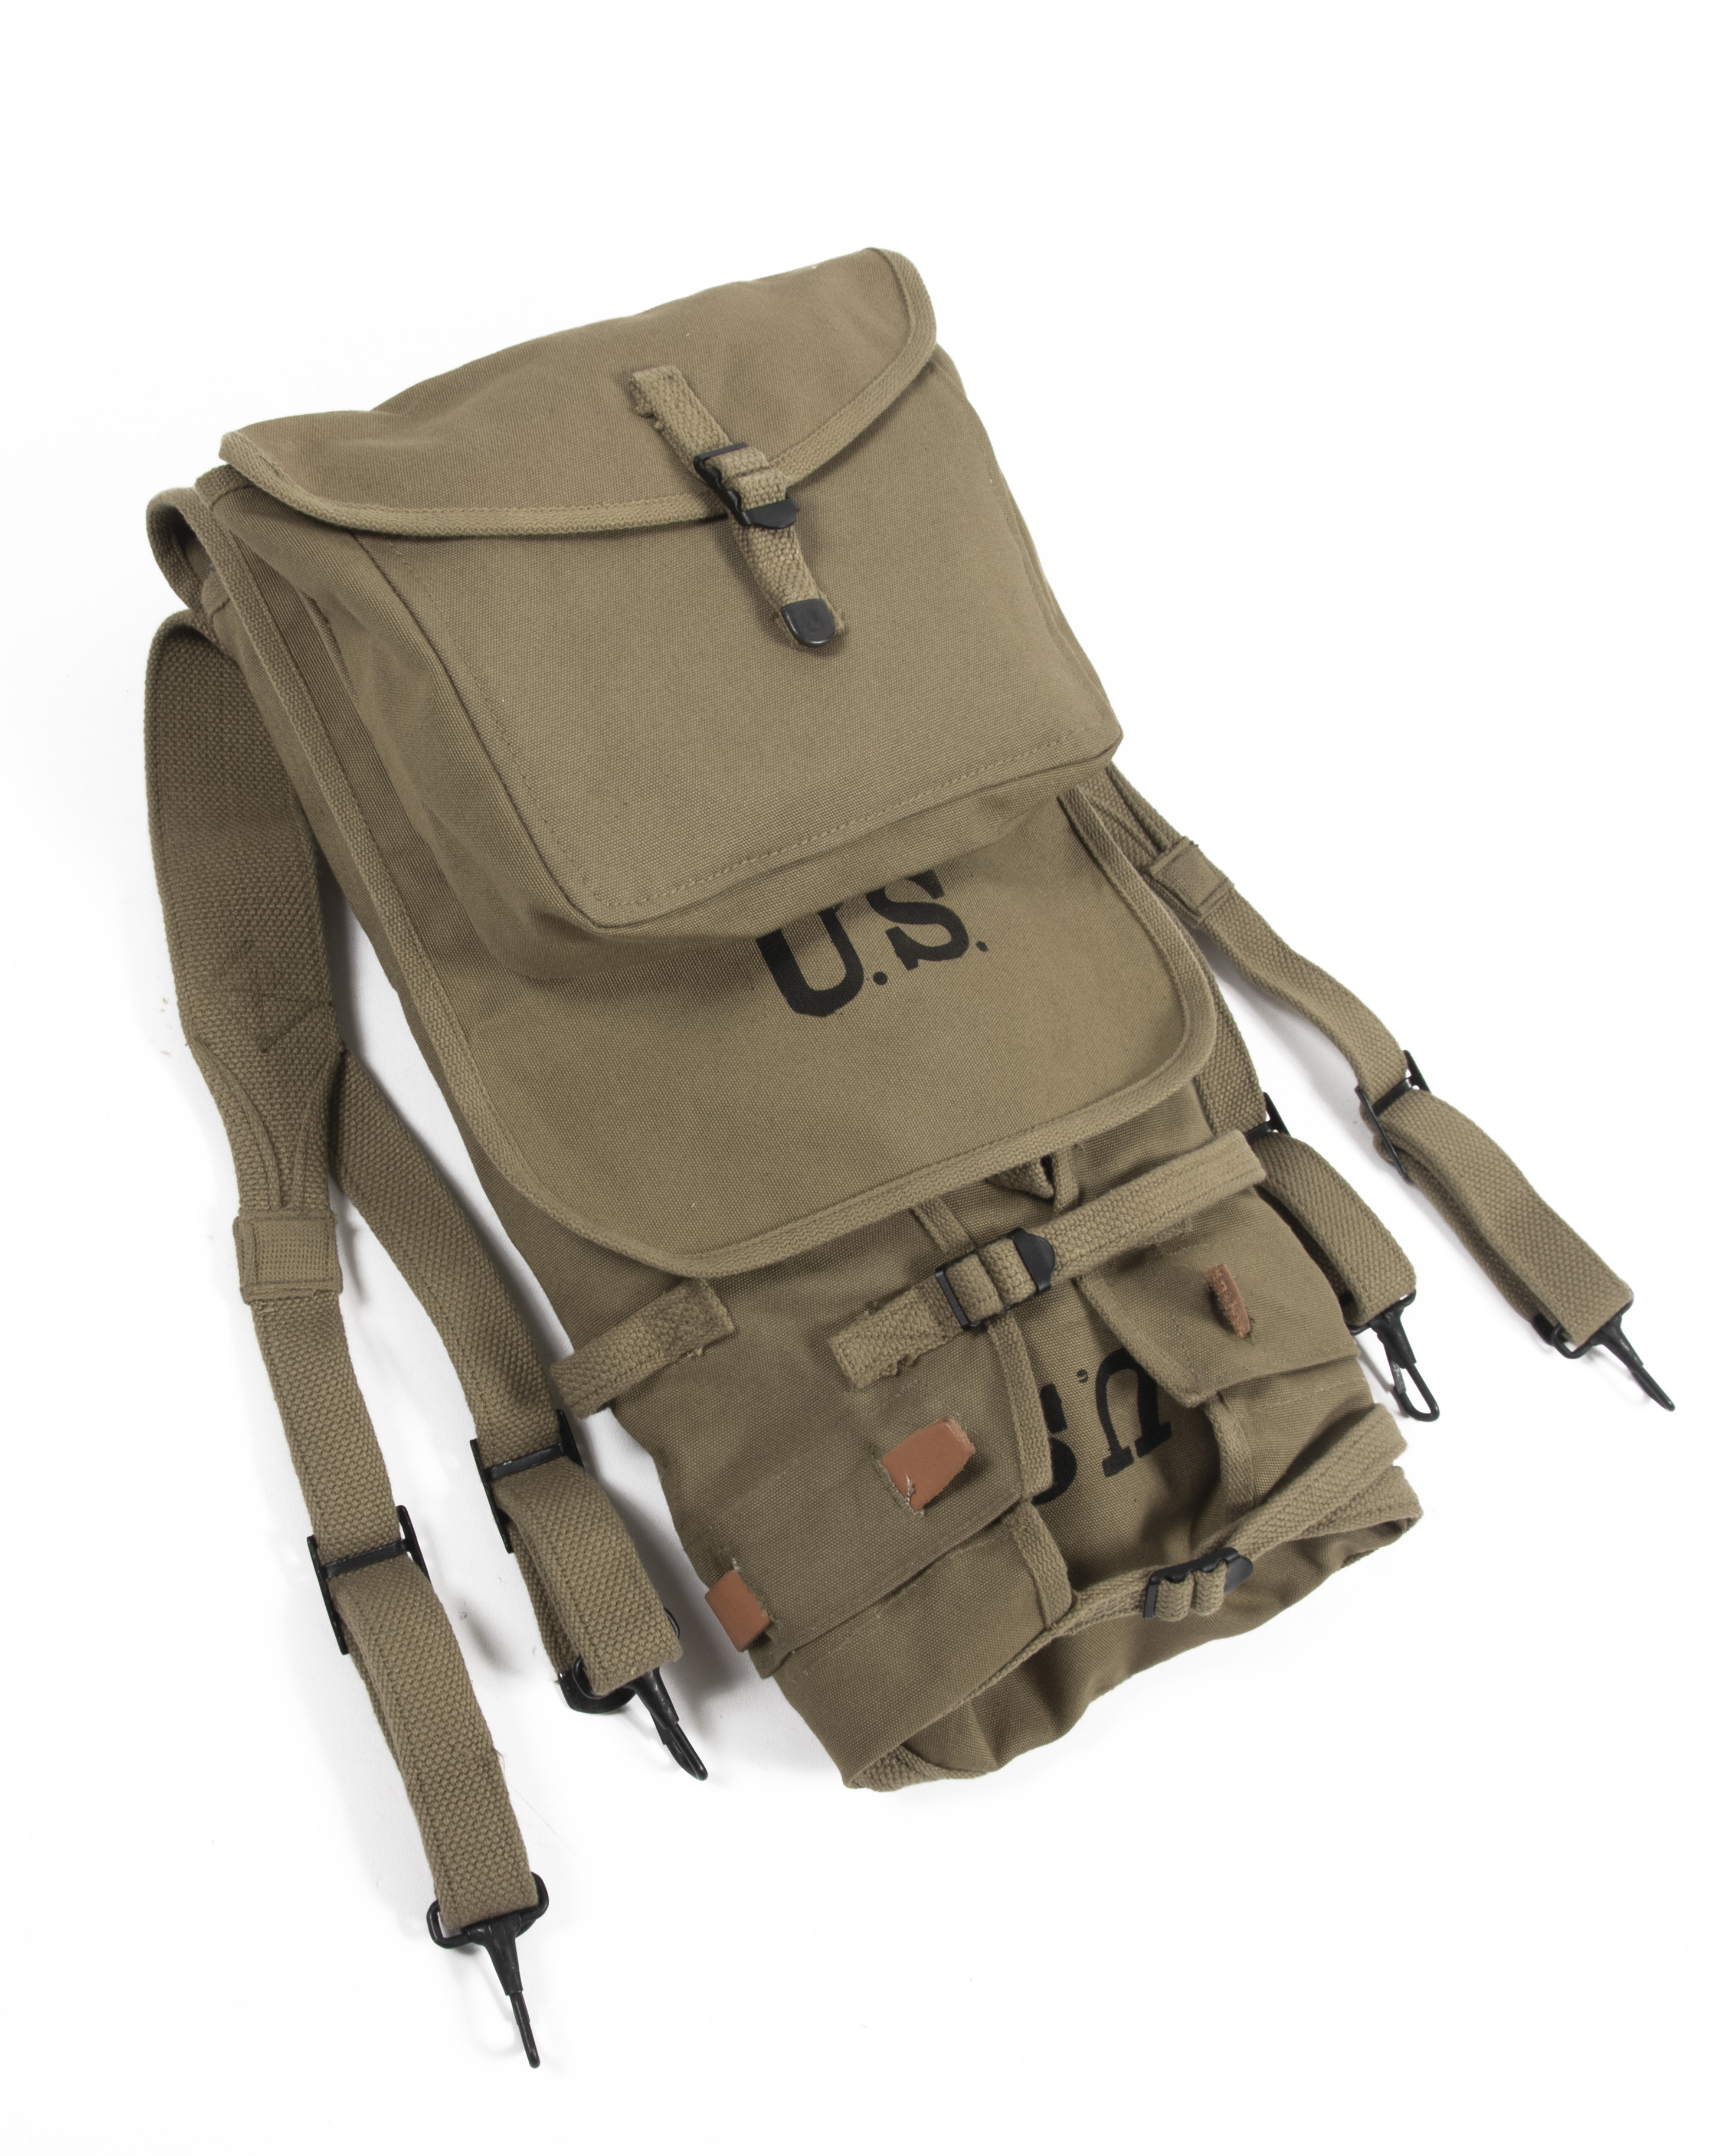 Details about   WWII US ARMY 1942 M1928 HAVERSACK KNAPSACK Military BACKPACK  High Quality